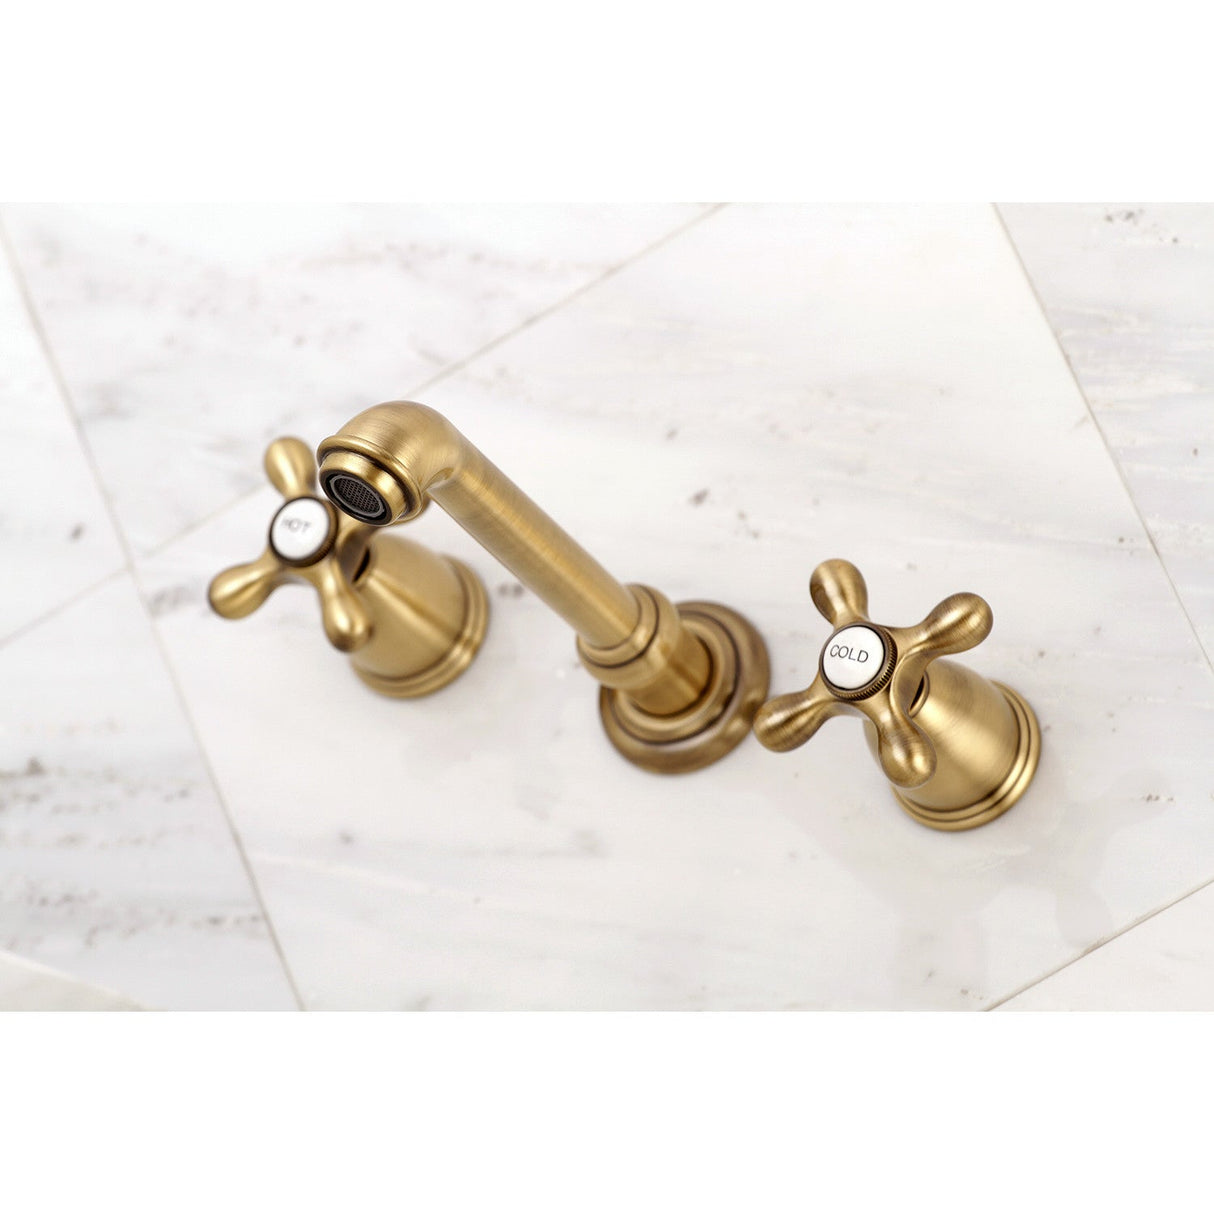 English Country KS7023AX Two-Handle 3-Hole Wall Mount Roman Tub Faucet, Antique Brass